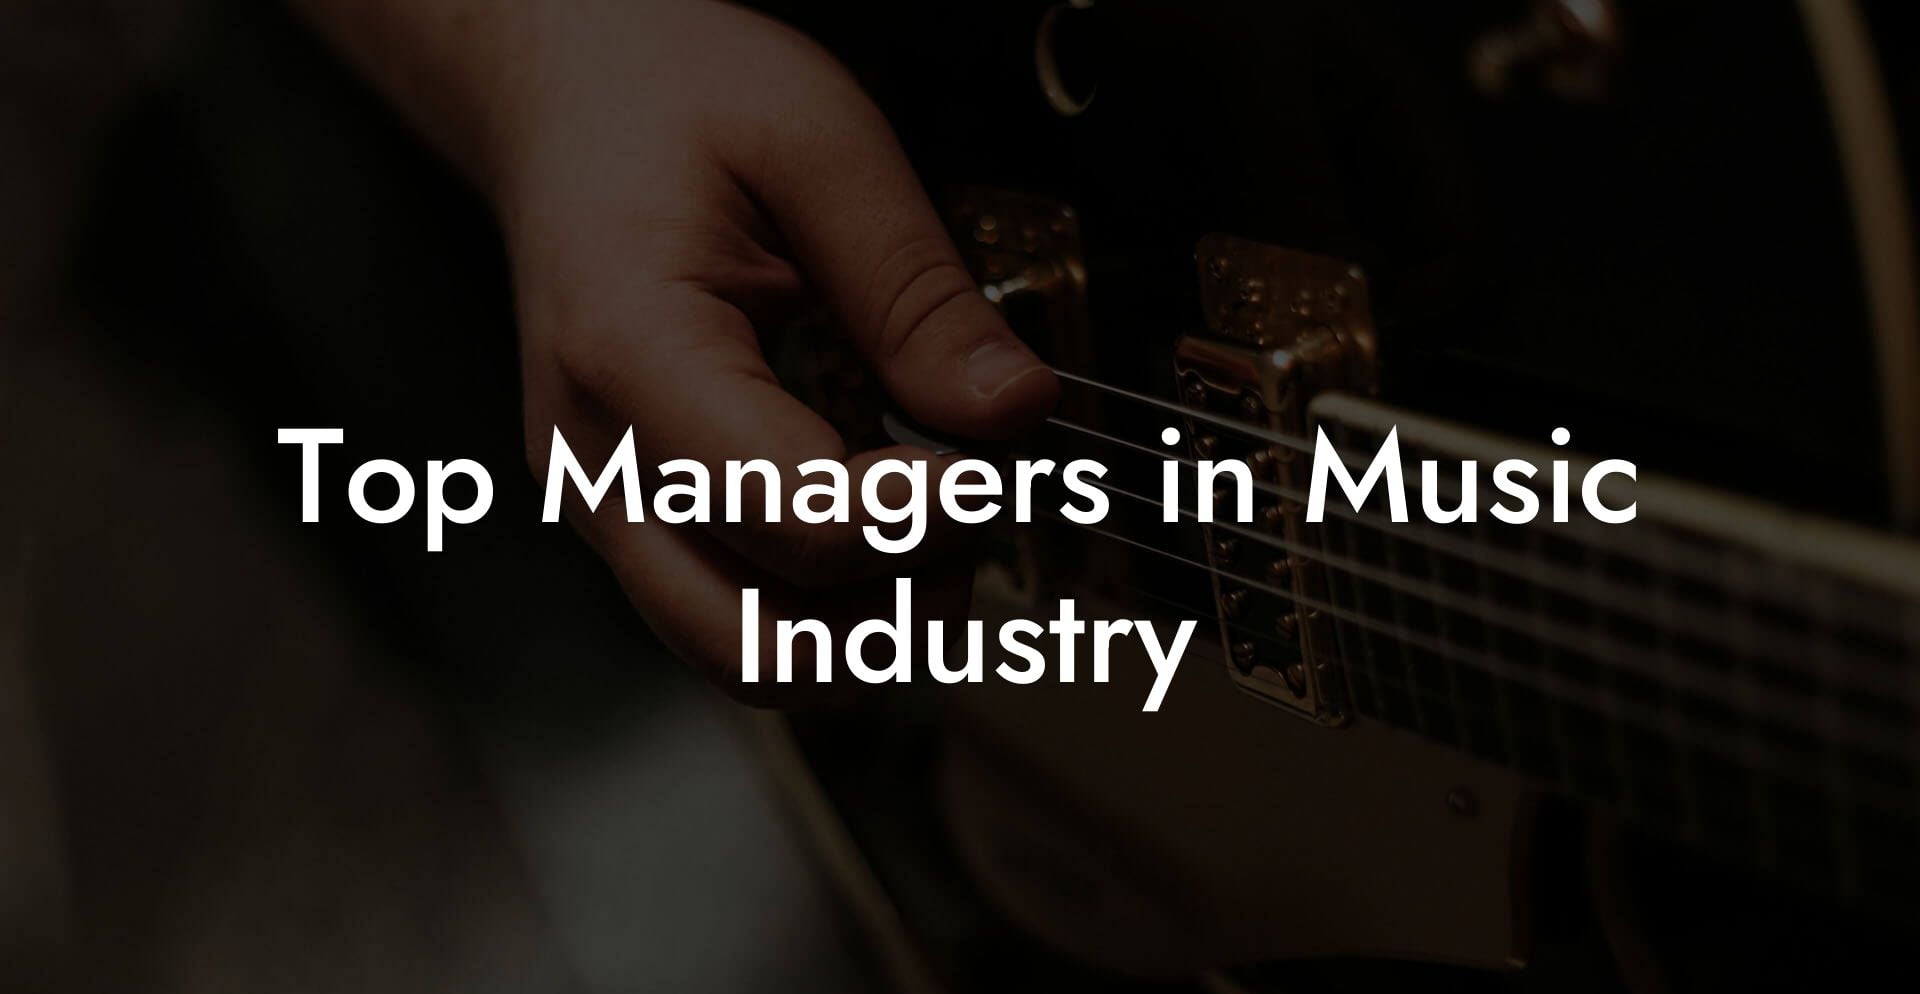 Top Managers in Music Industry